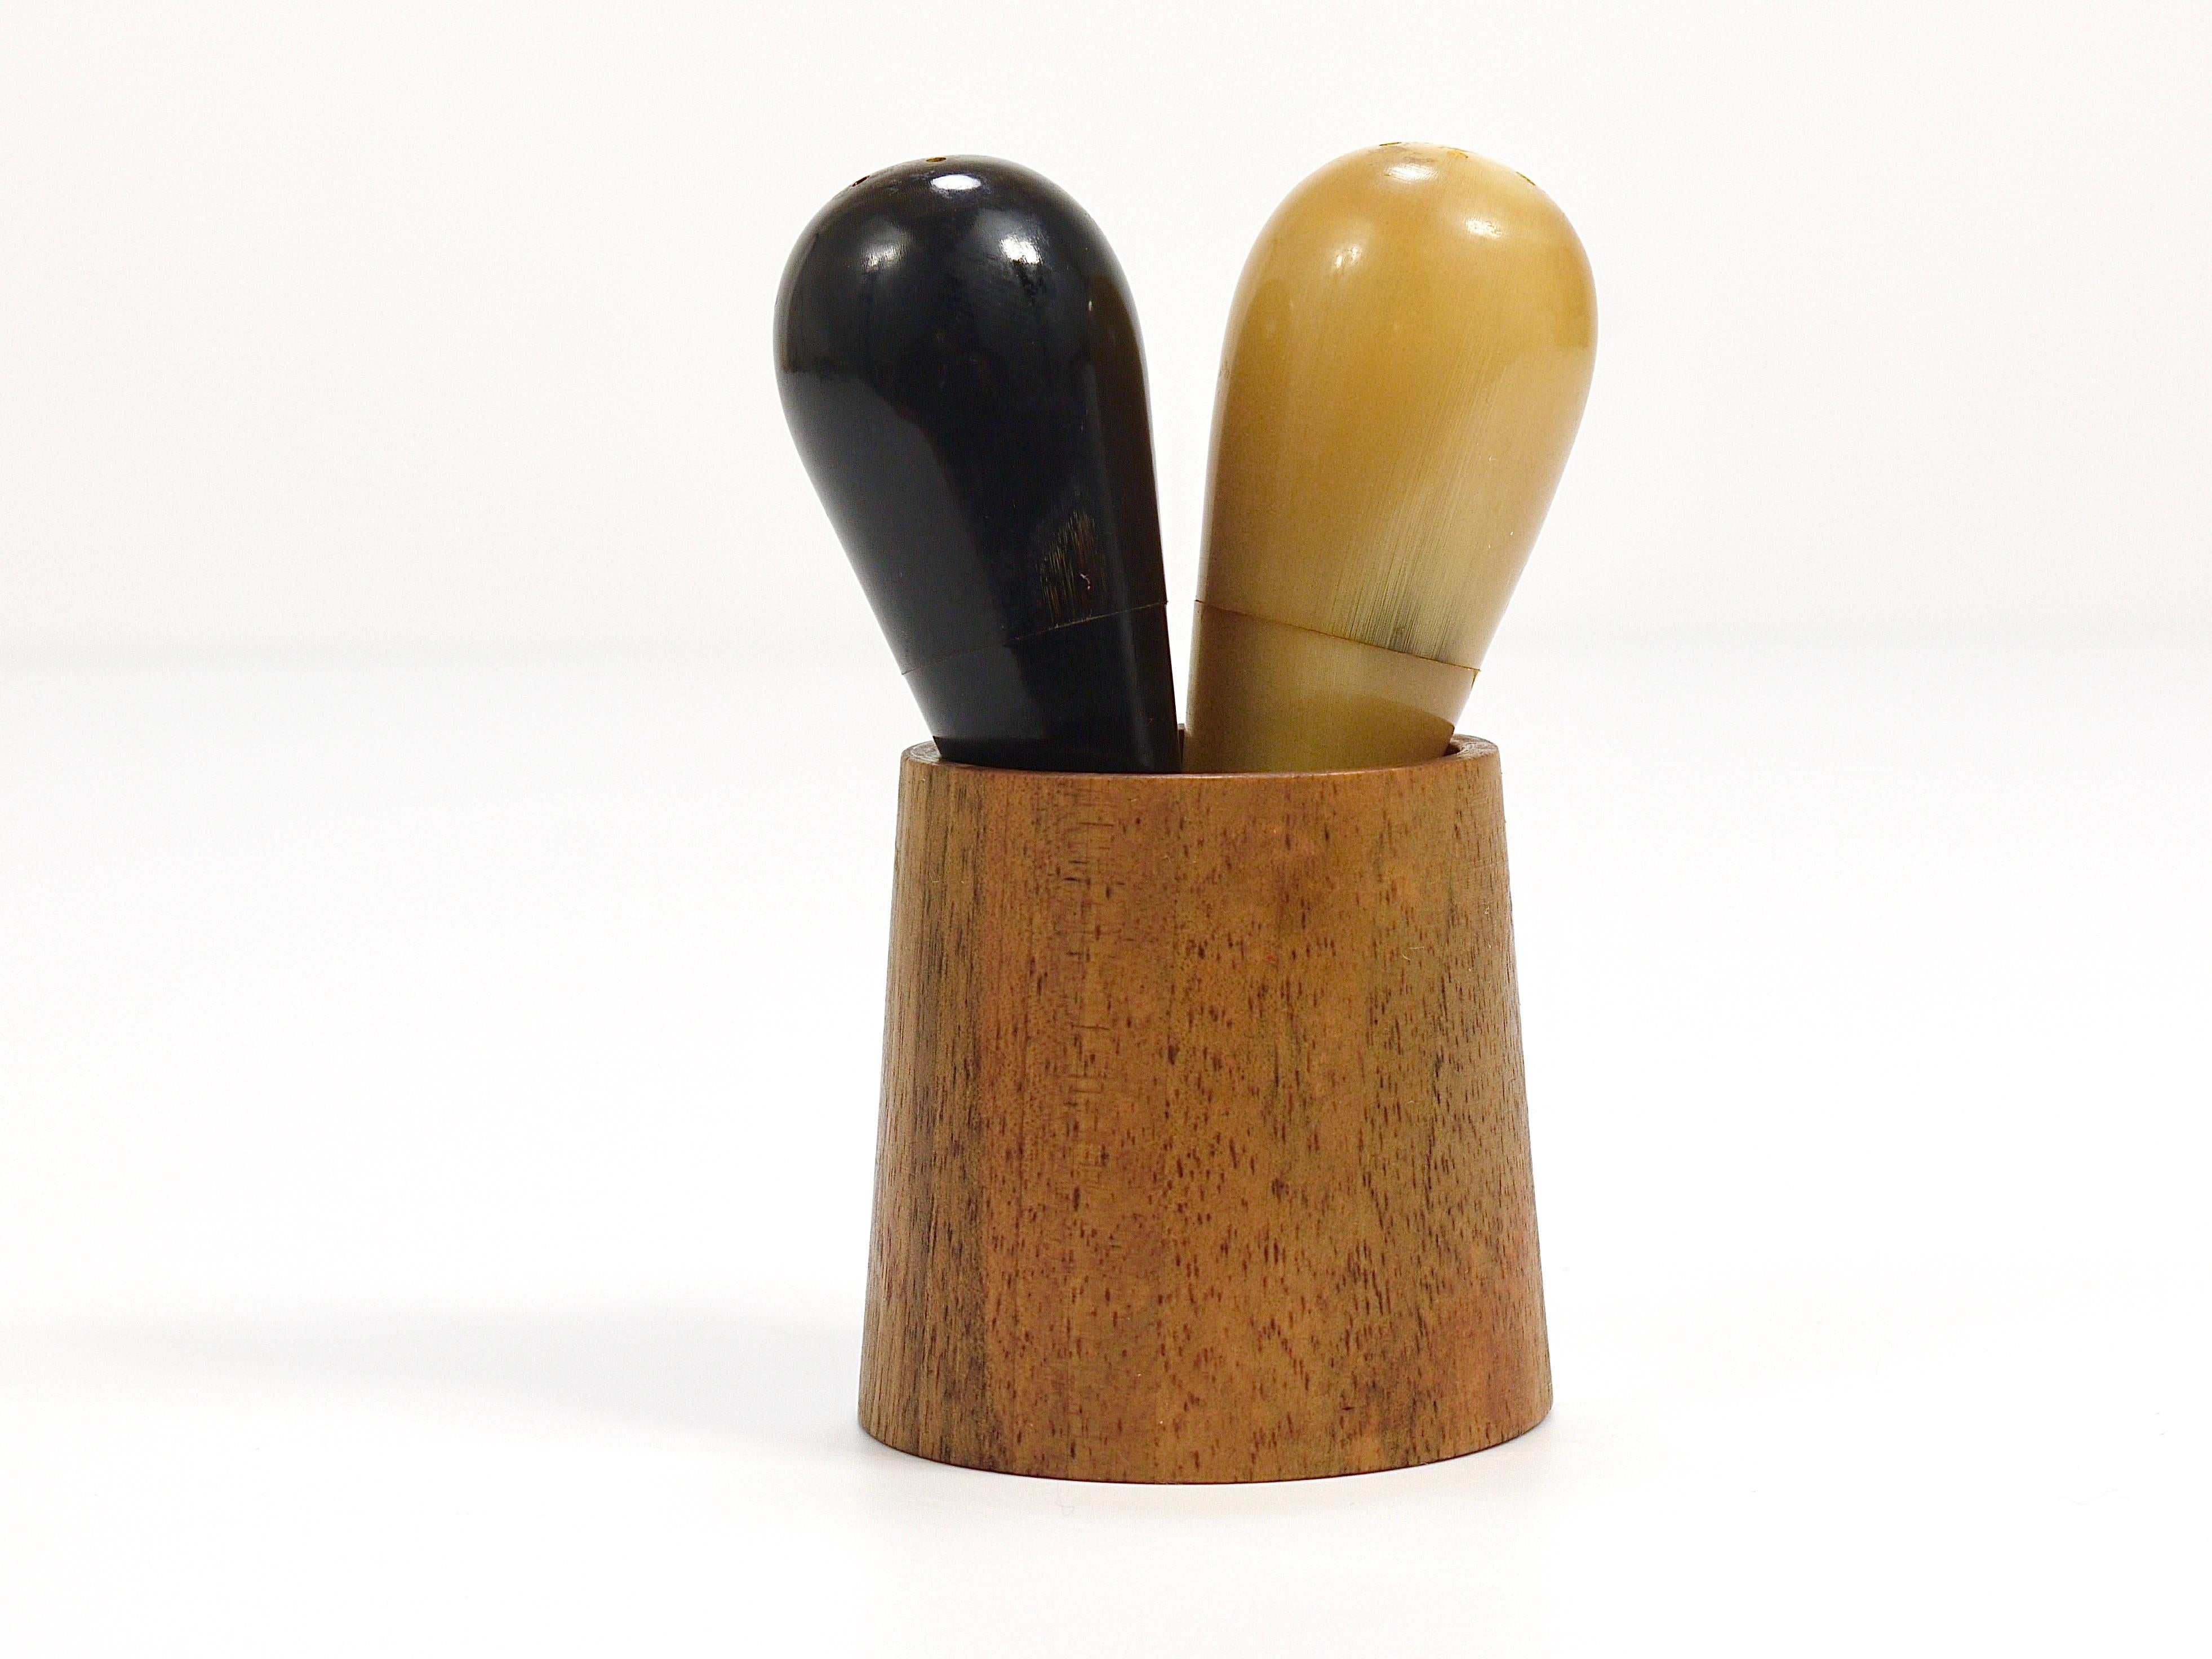 A wonderful and rare pair of Midcentury modern minimalism salt and pepper shakers from the 1950s. Designed and manufactured by Werkstatte Carl Aubock Vienna. The drop shaped shakers are made of light and dark ox cow horn, its wooden cup holder is